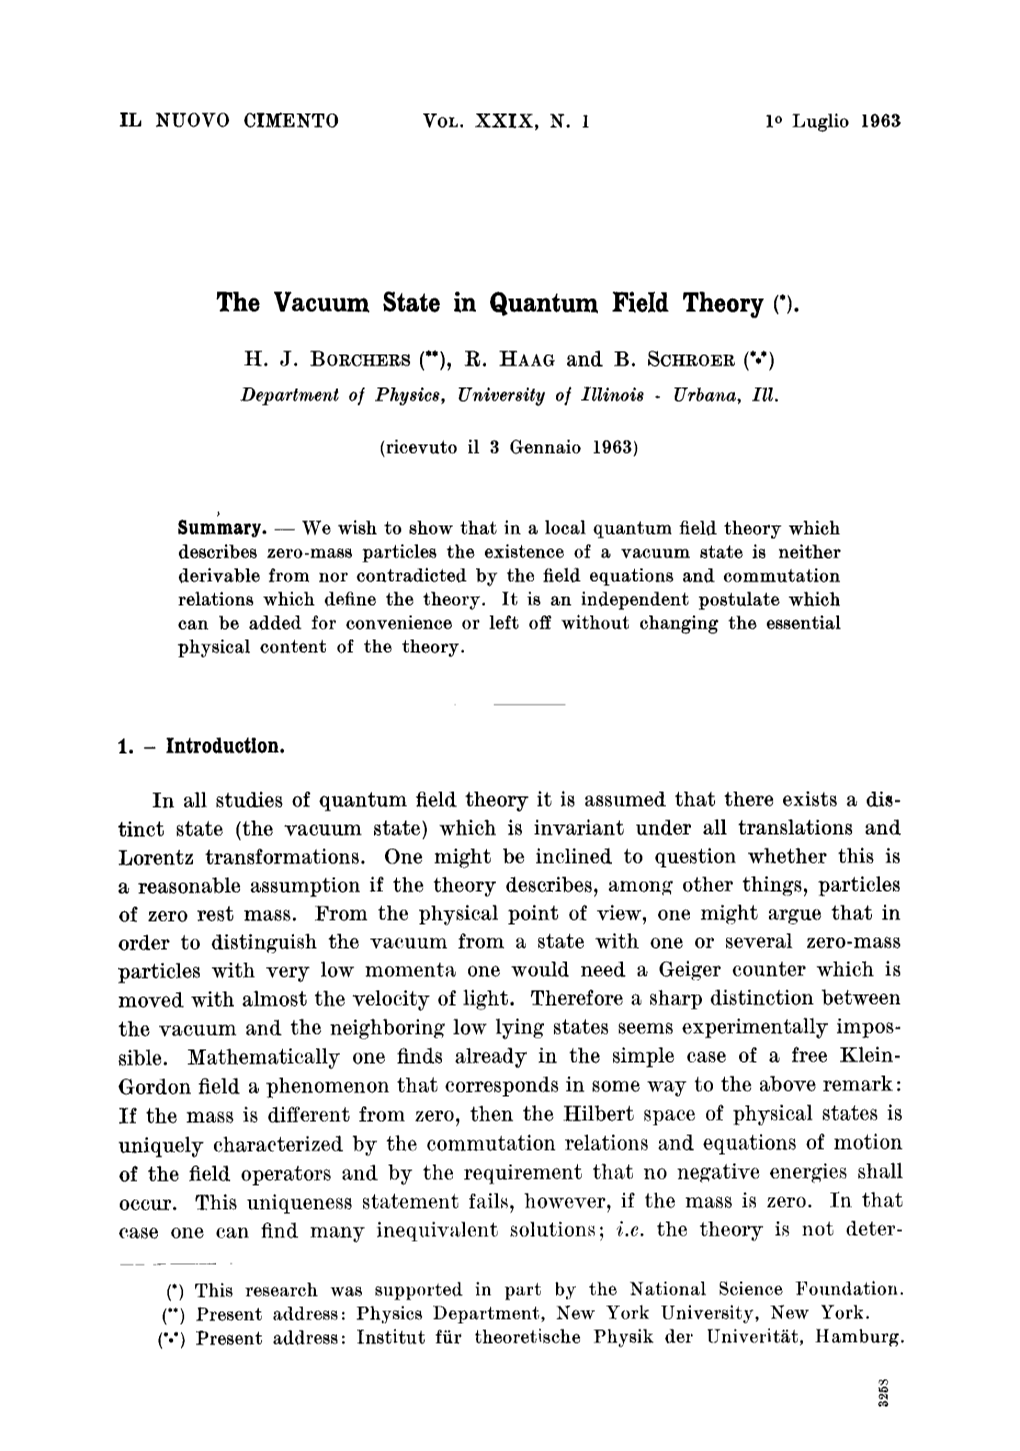 THE VACUUM STATE in QUANTUM FIELD THEORY 149 Mined by the Commutation Relations, Equations of Motion and the Requirde Positivity of the Energy (Section 2)